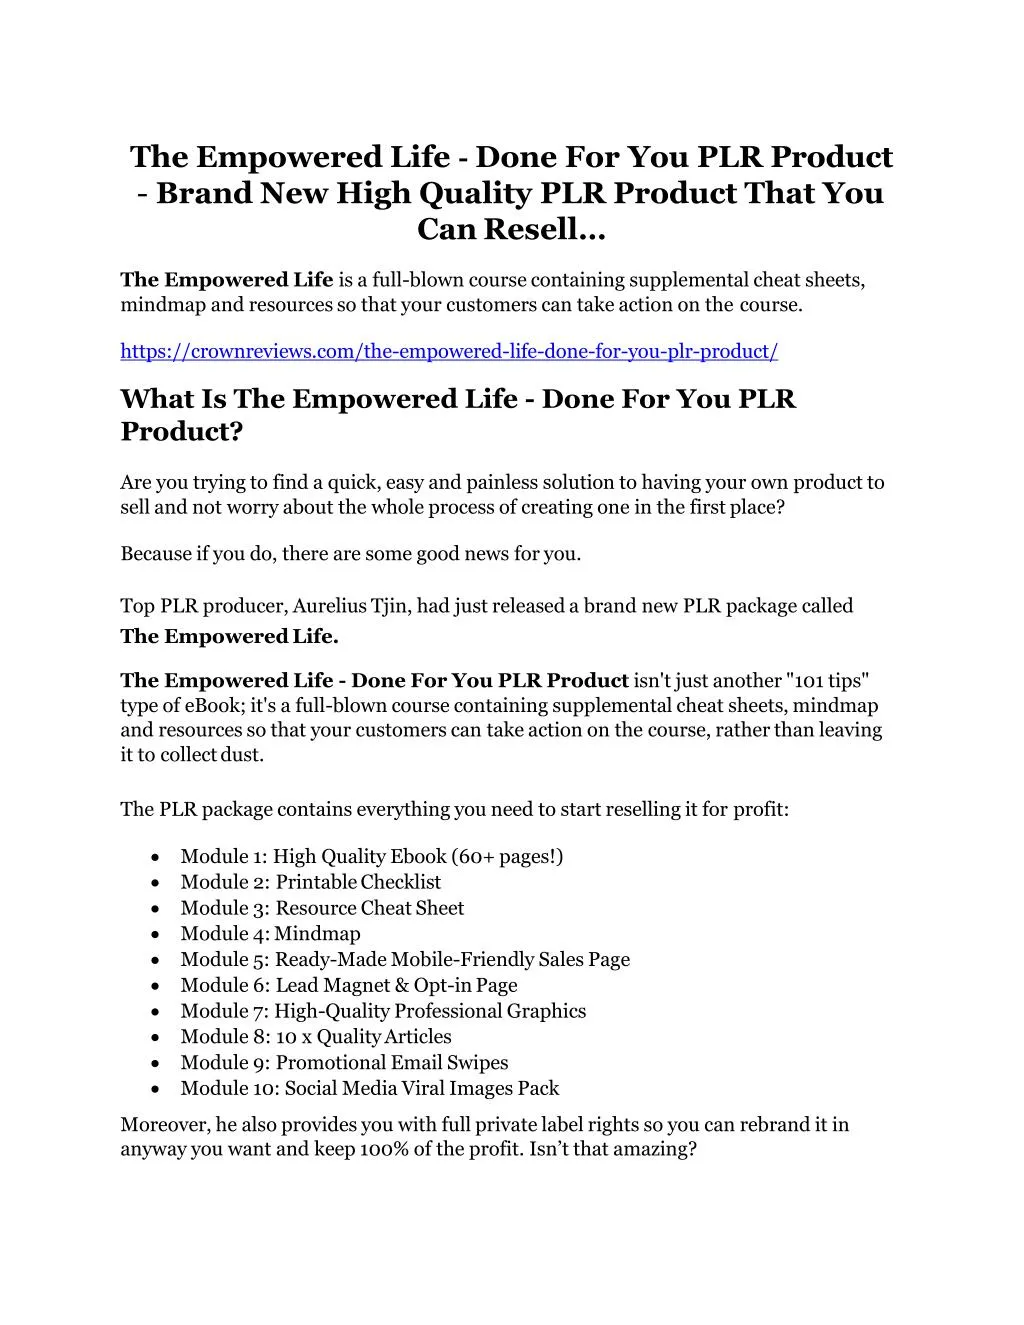 the empowered life done for you plr product brand